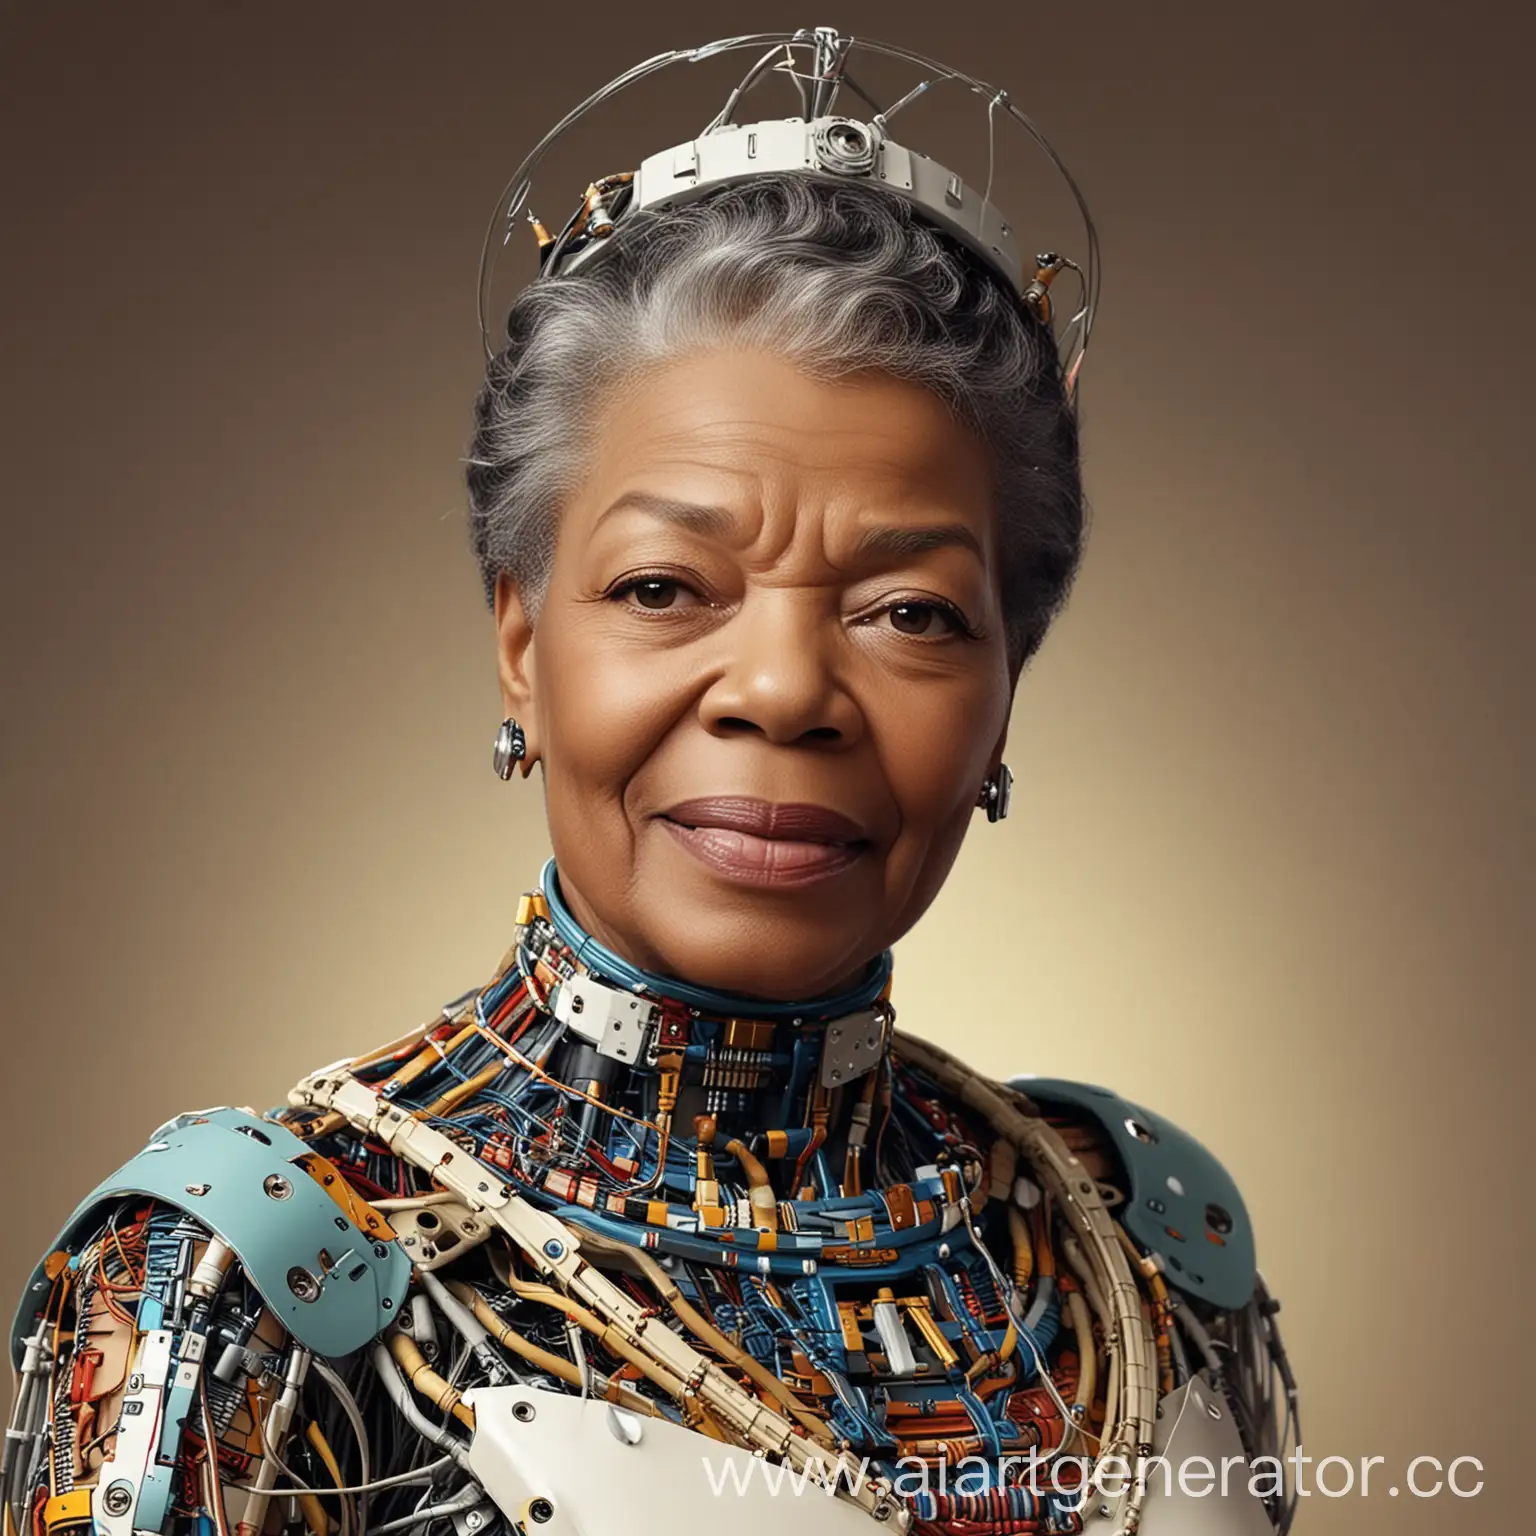 Maya-Angelou-Cyborg-Portrait-Fusion-of-Literary-Grace-and-Technological-Power